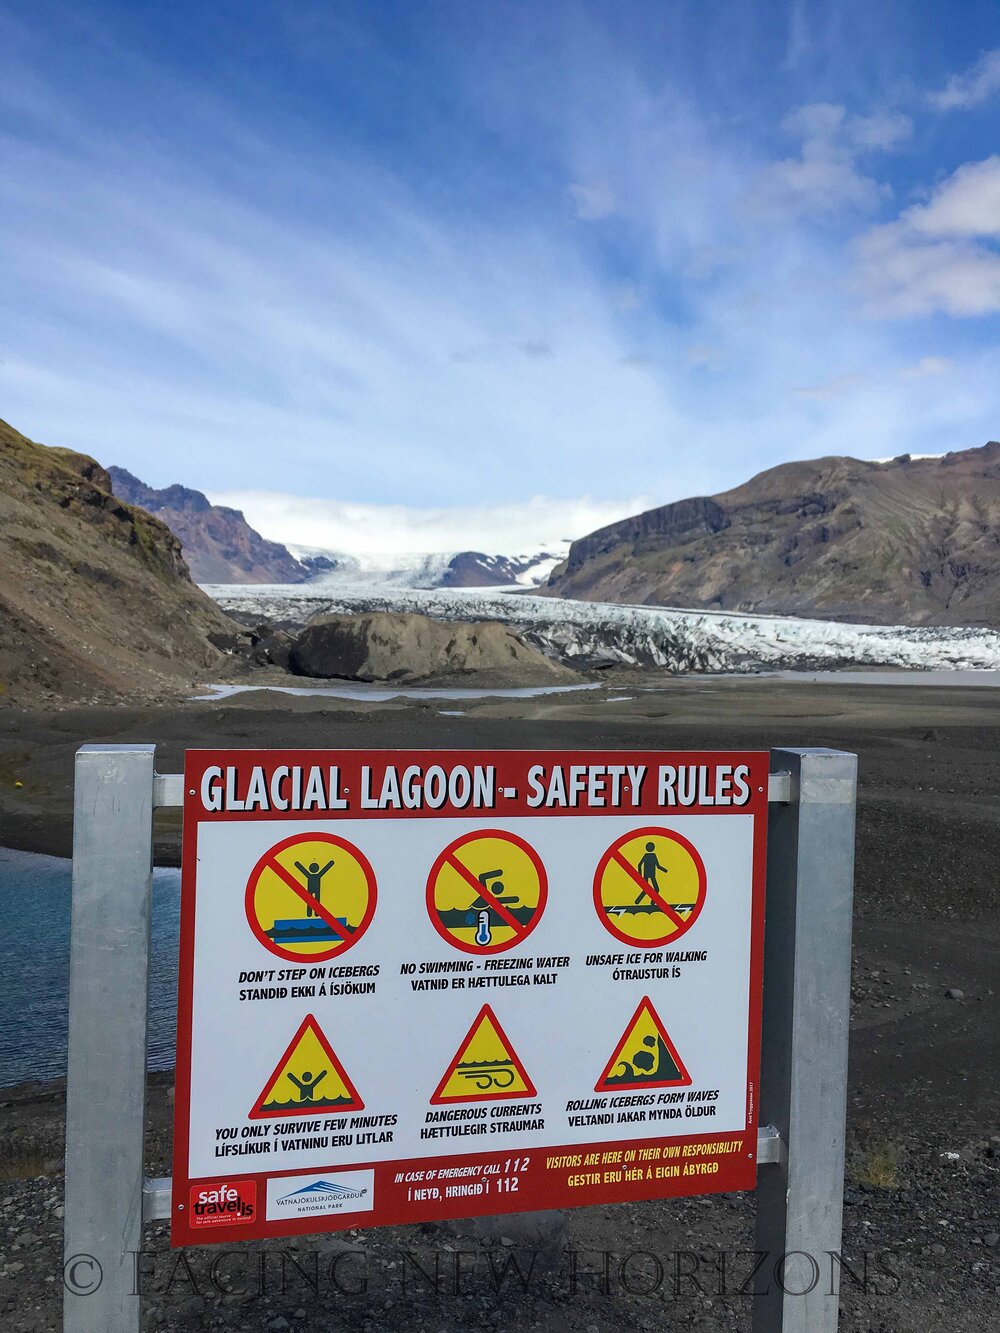  You can take tours out to the glacier, but you really shouldn’t go out on your own. And regardless of how beautiful the water is, definitely don’t swim in the glacial pools unless you want hypothermia  